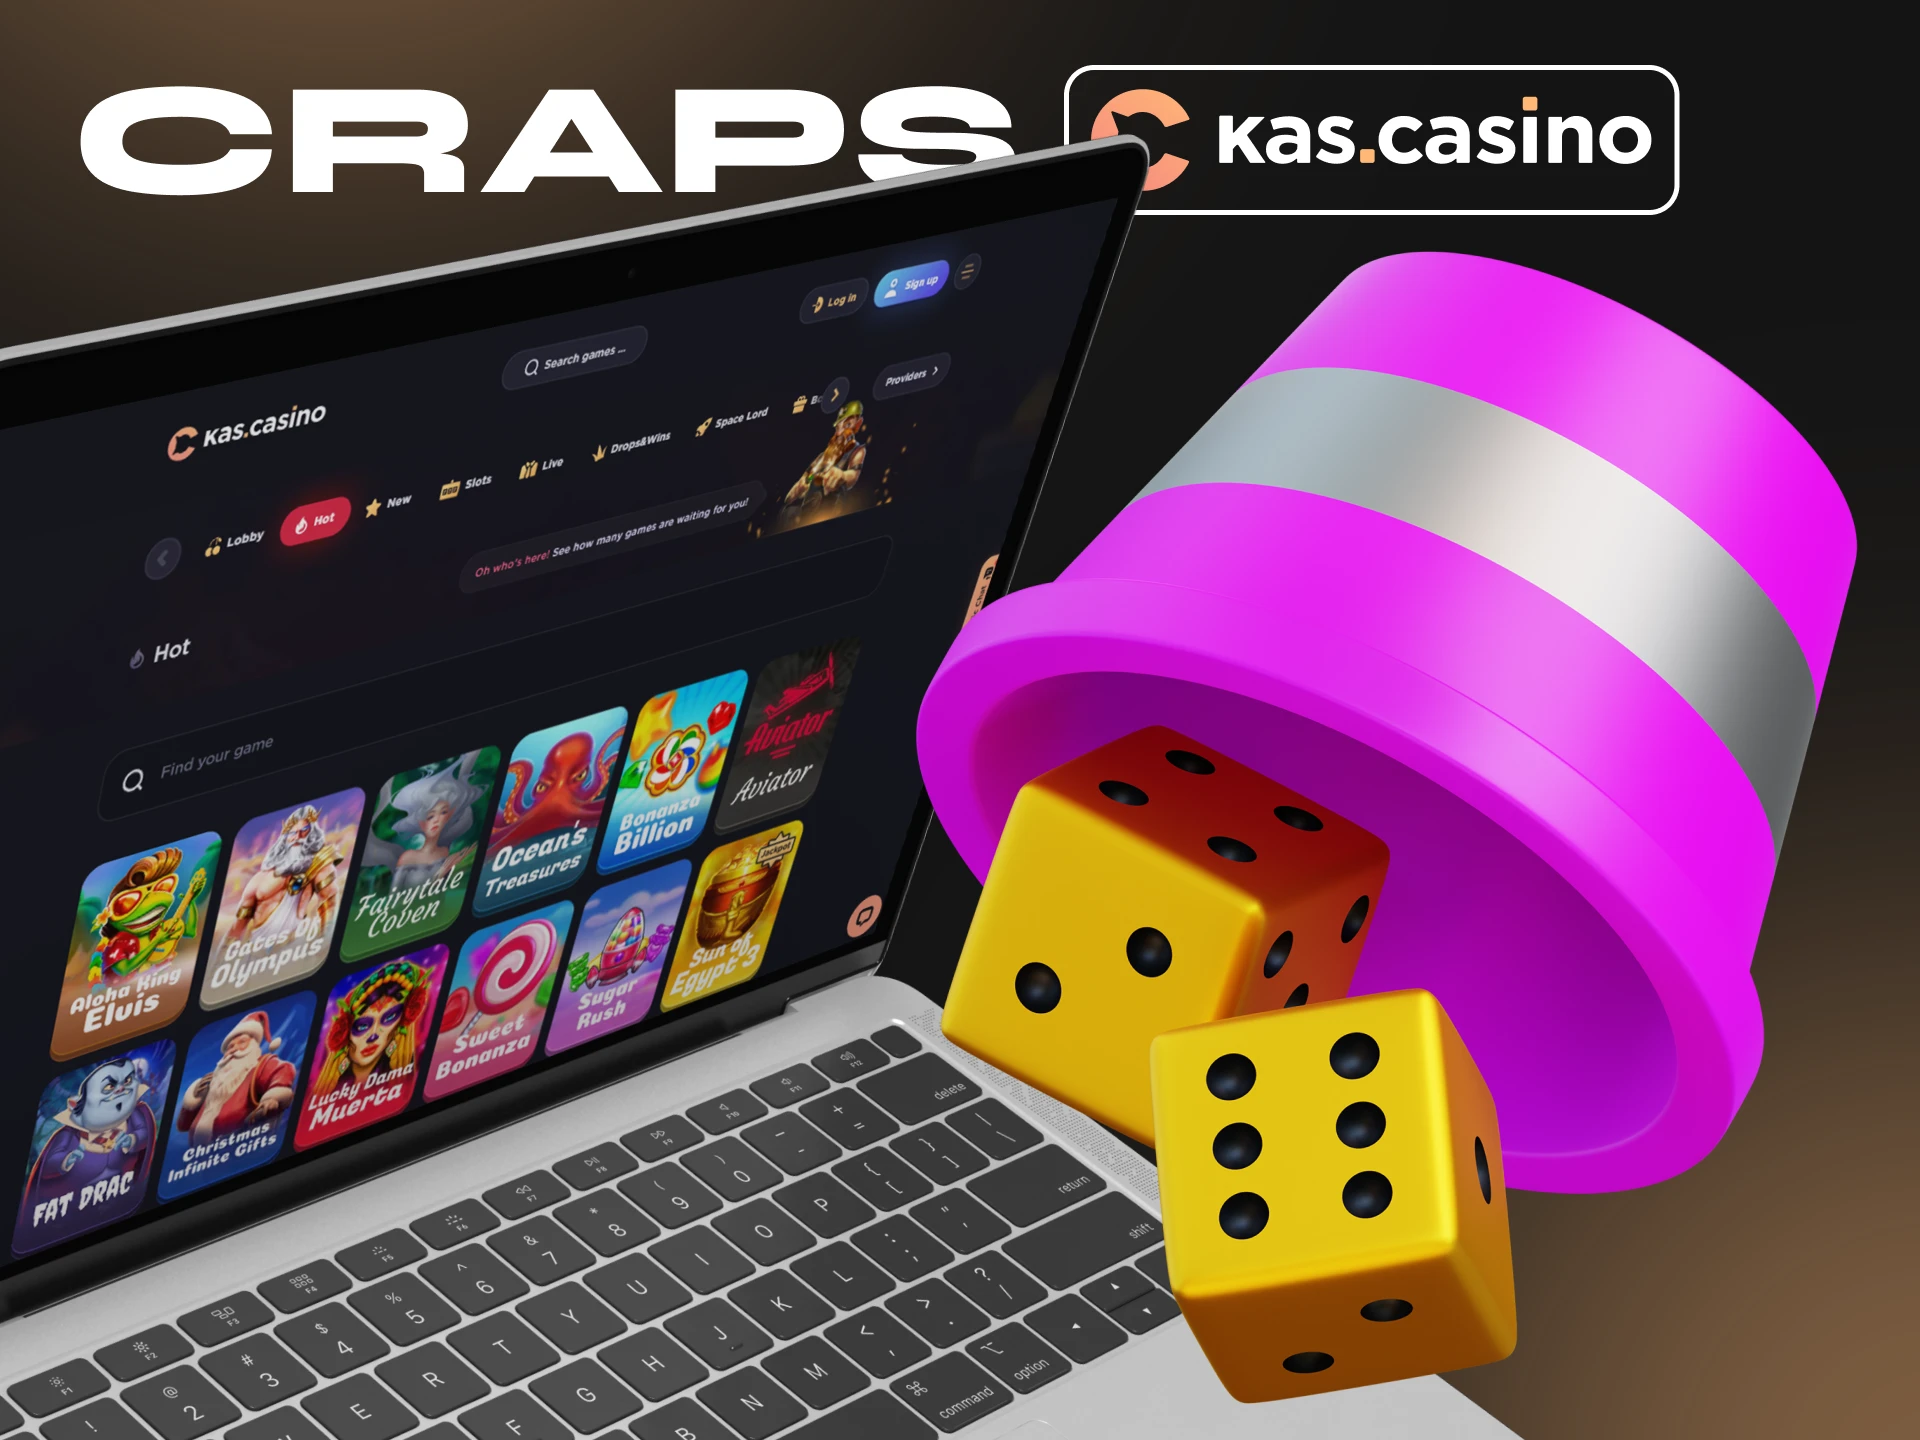 If you are a craps lover, try playing at Kas Casino.